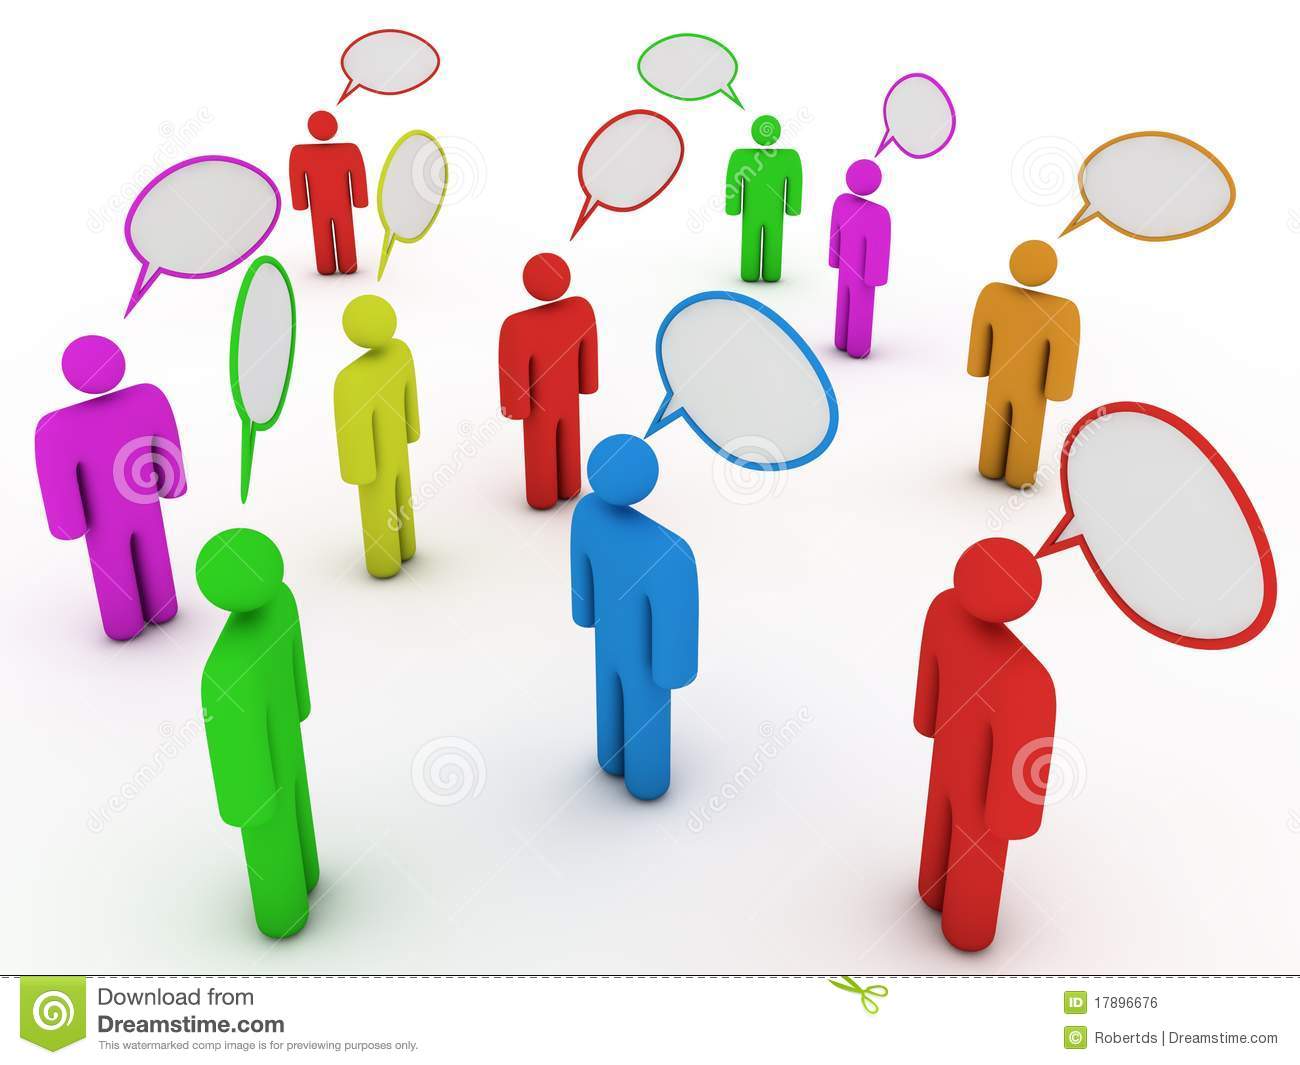 Chatting People With Speech Bubbles Royalty Free Stock Image   Image    